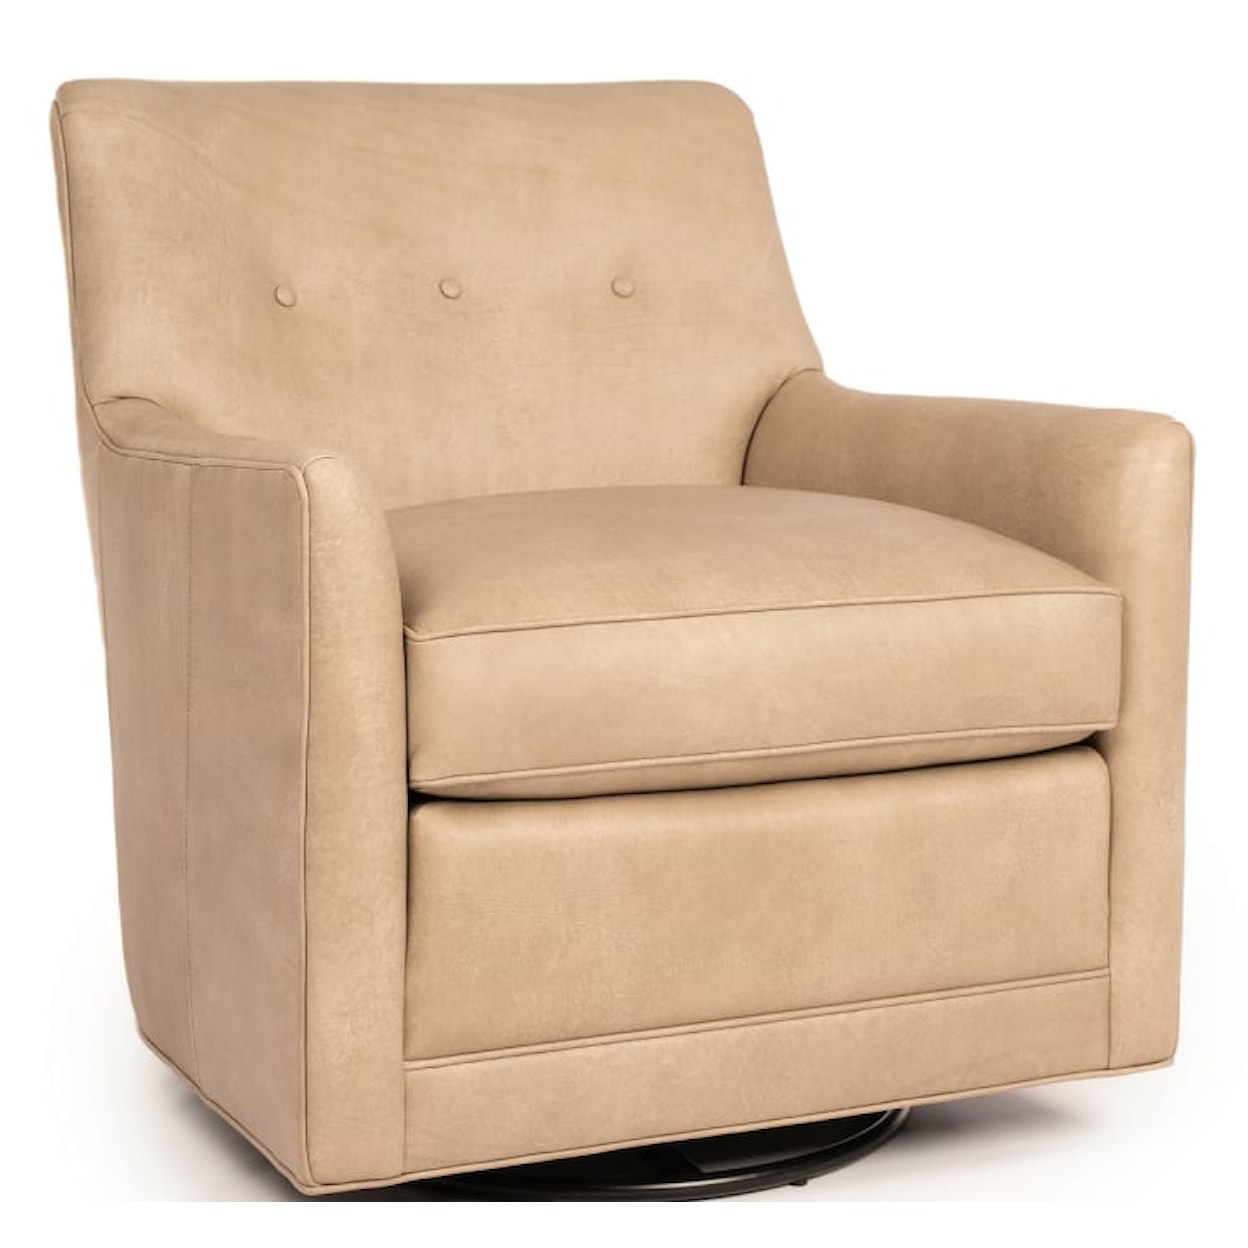 Smith Brothers 510 Swivel Chair